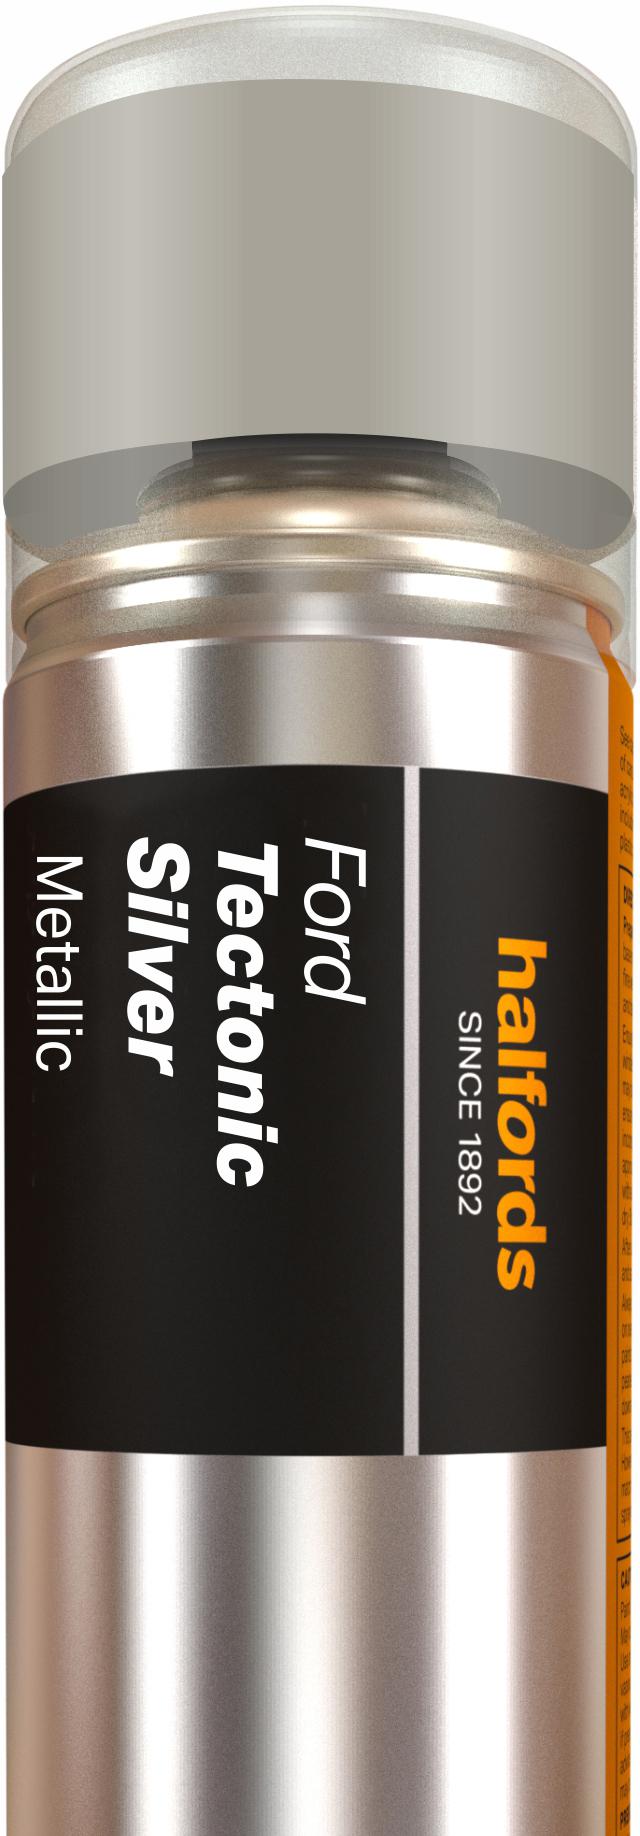 Halfords Ford Tectonic Silver Car Spray Paint 300Ml